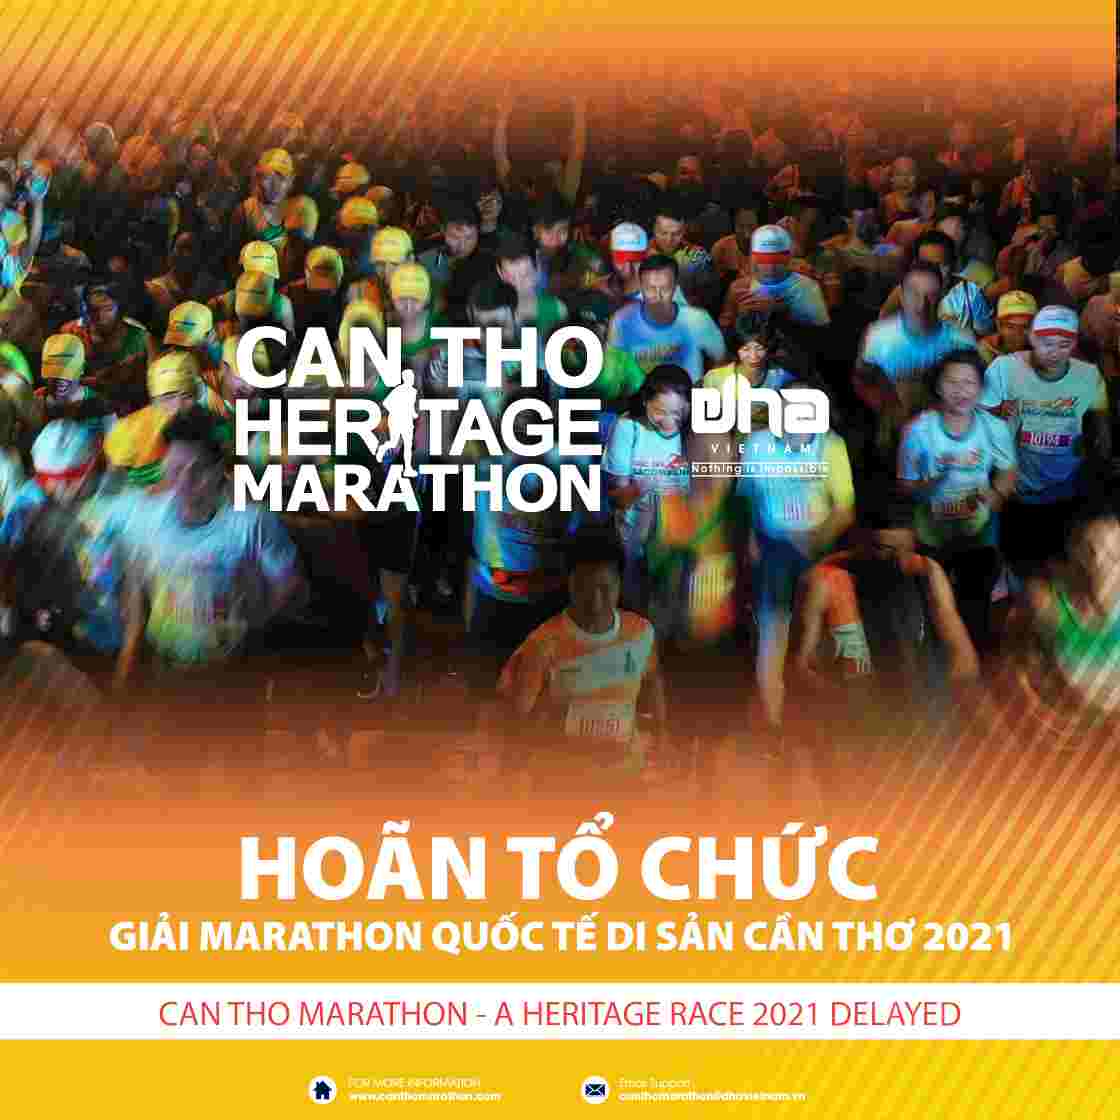 Can Tho Marathon - A Heritage Race Delayed to December 2022